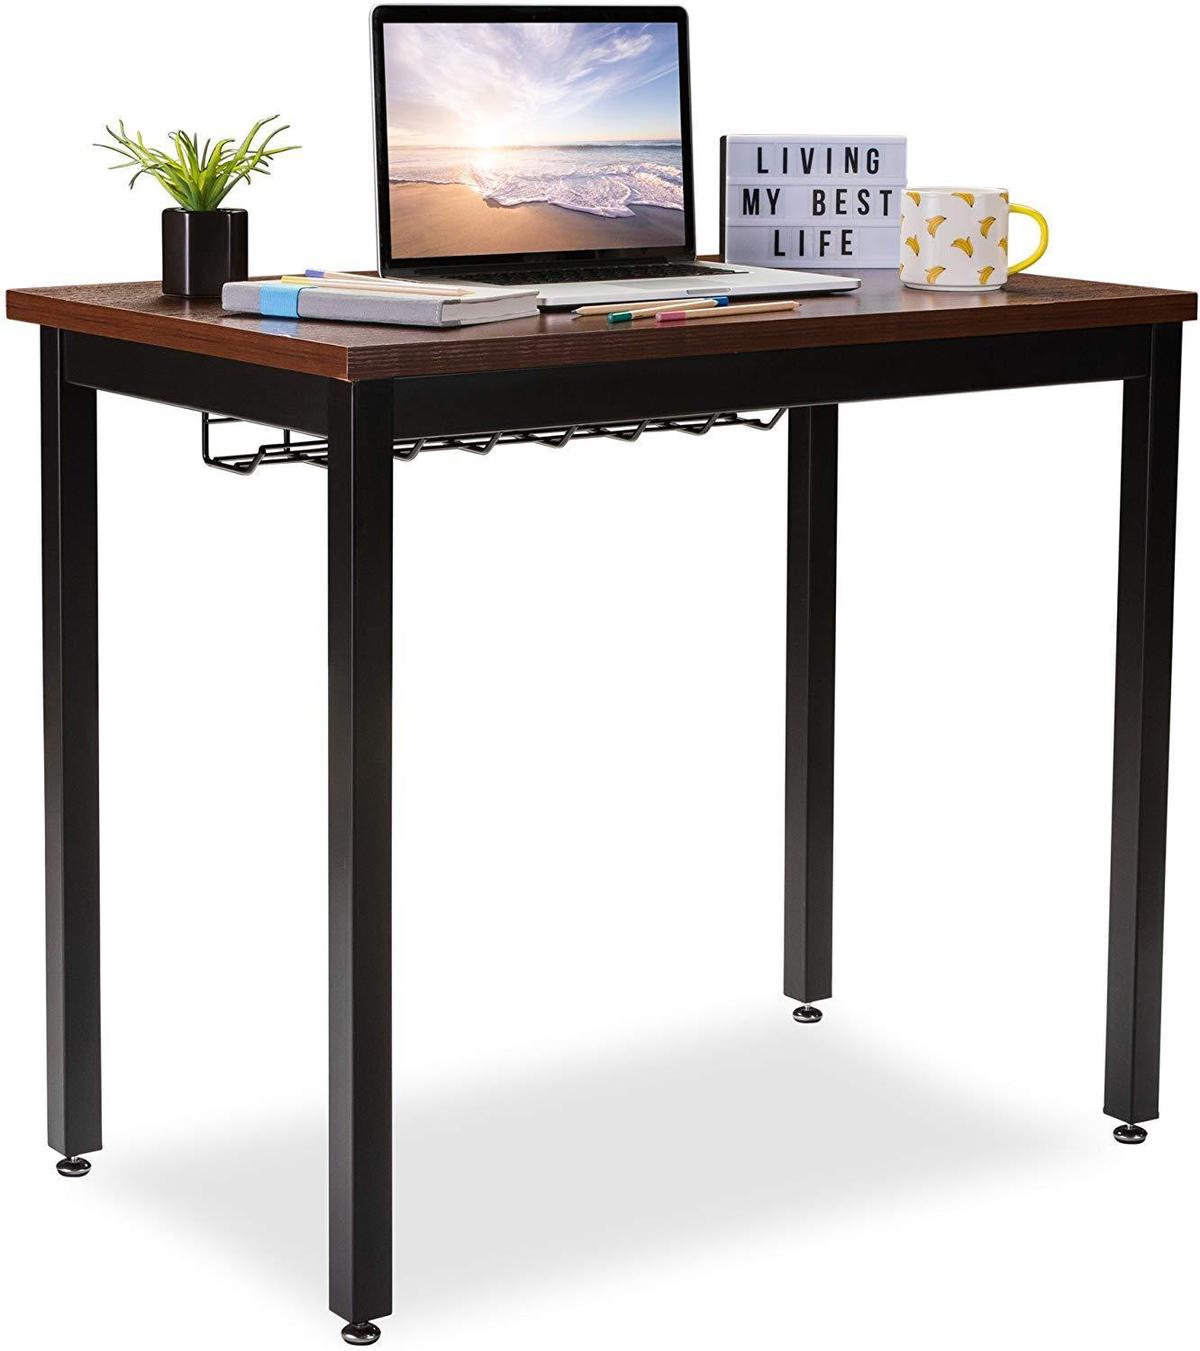 The Office Oasis Small Computer Desk for Home Office - 36" Length Table w/Cable Organizer